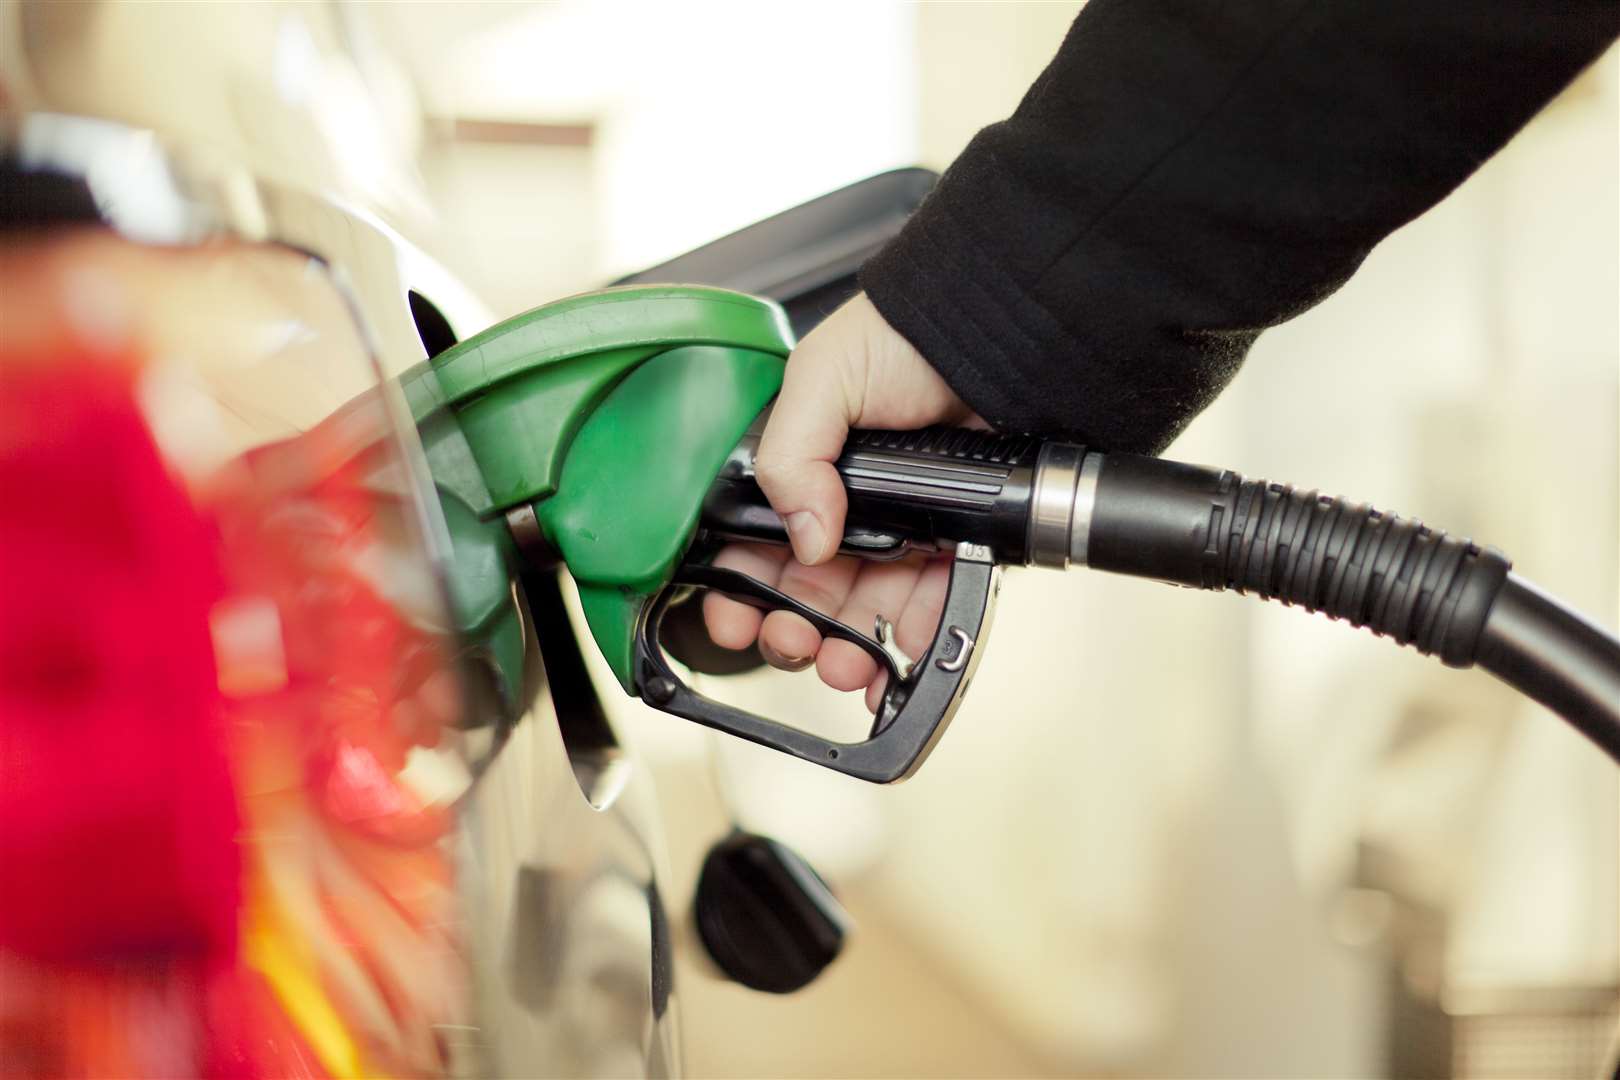 600,000 vehicles are not compatible with the new petrol